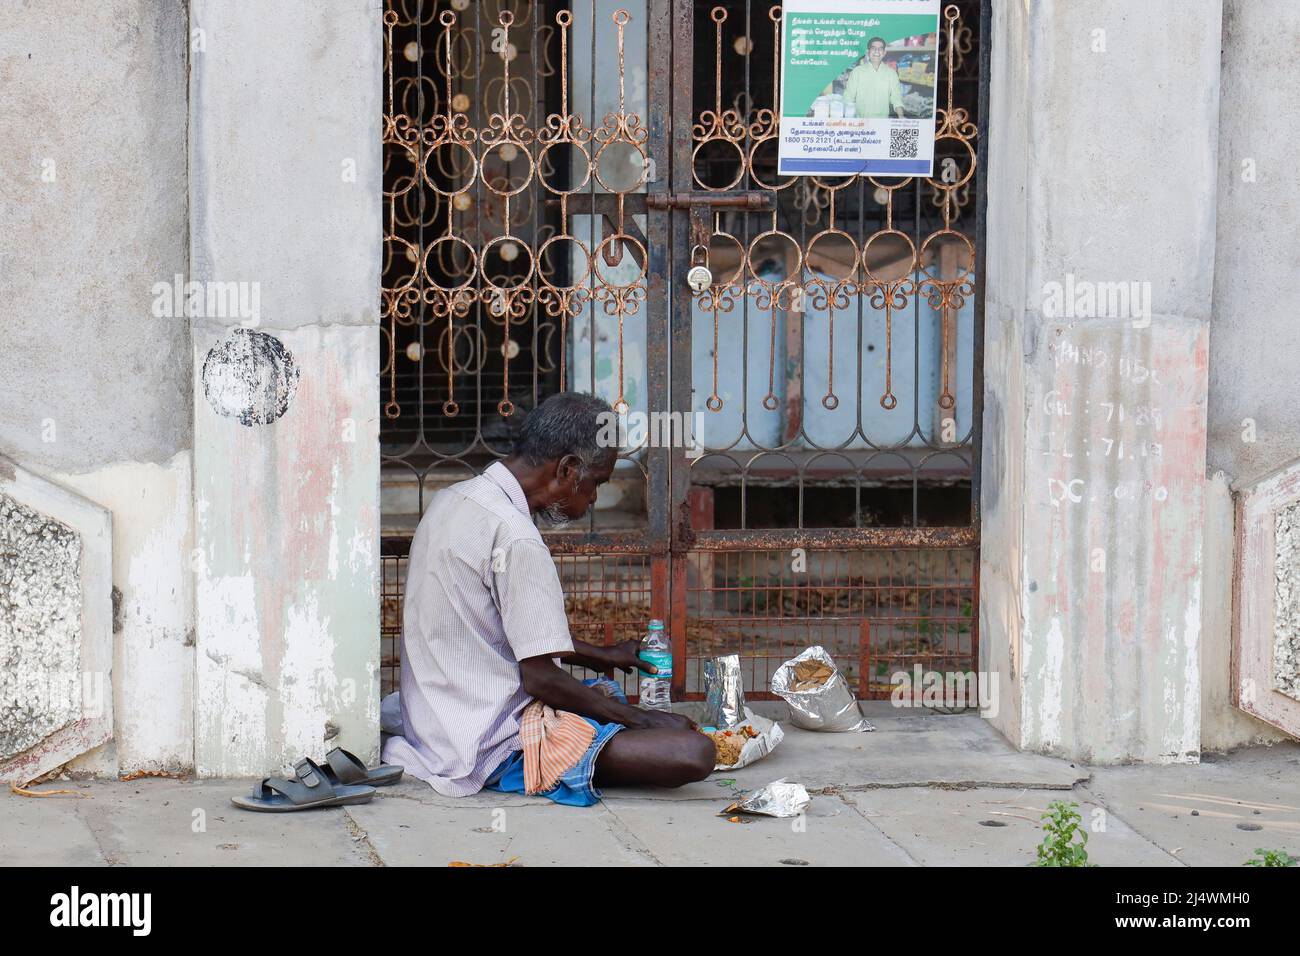 Man sitting in the doorway of a dilapidated house eating his lunch in Trichy, Tamil Nadu, India Stock Photo